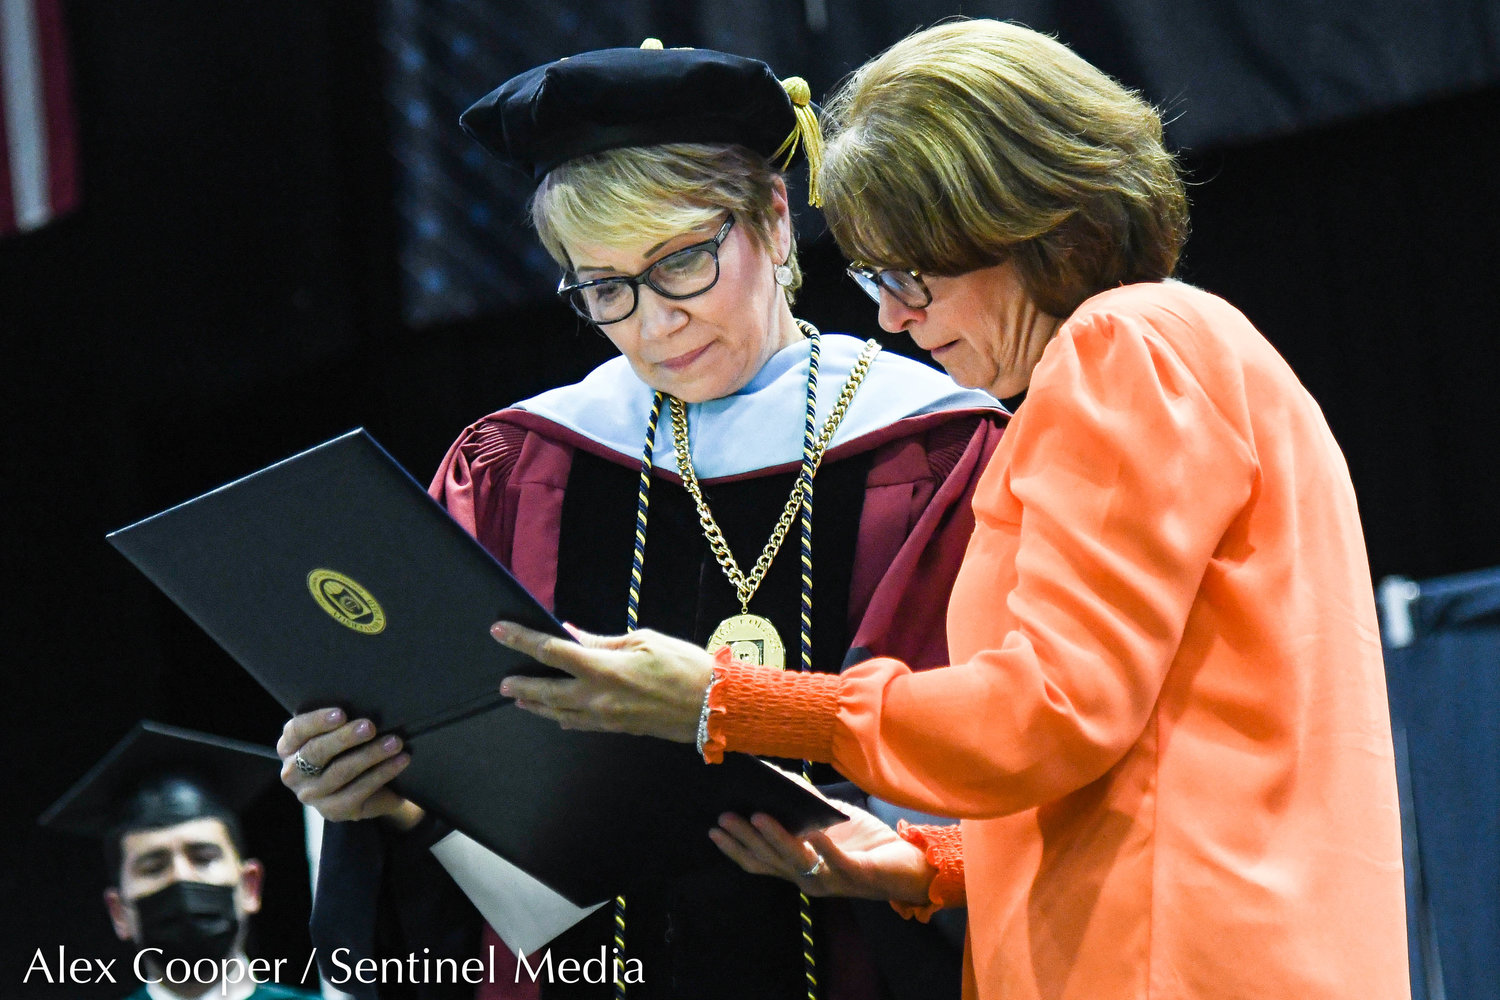 Utica University president Dr. Laura Casamento presents John Paul Ramel's degree to a family member during the school's undergraduate commencement ceremony on Thursday at the Adirondack Bank Center at the Utica Memorial Auditorium.